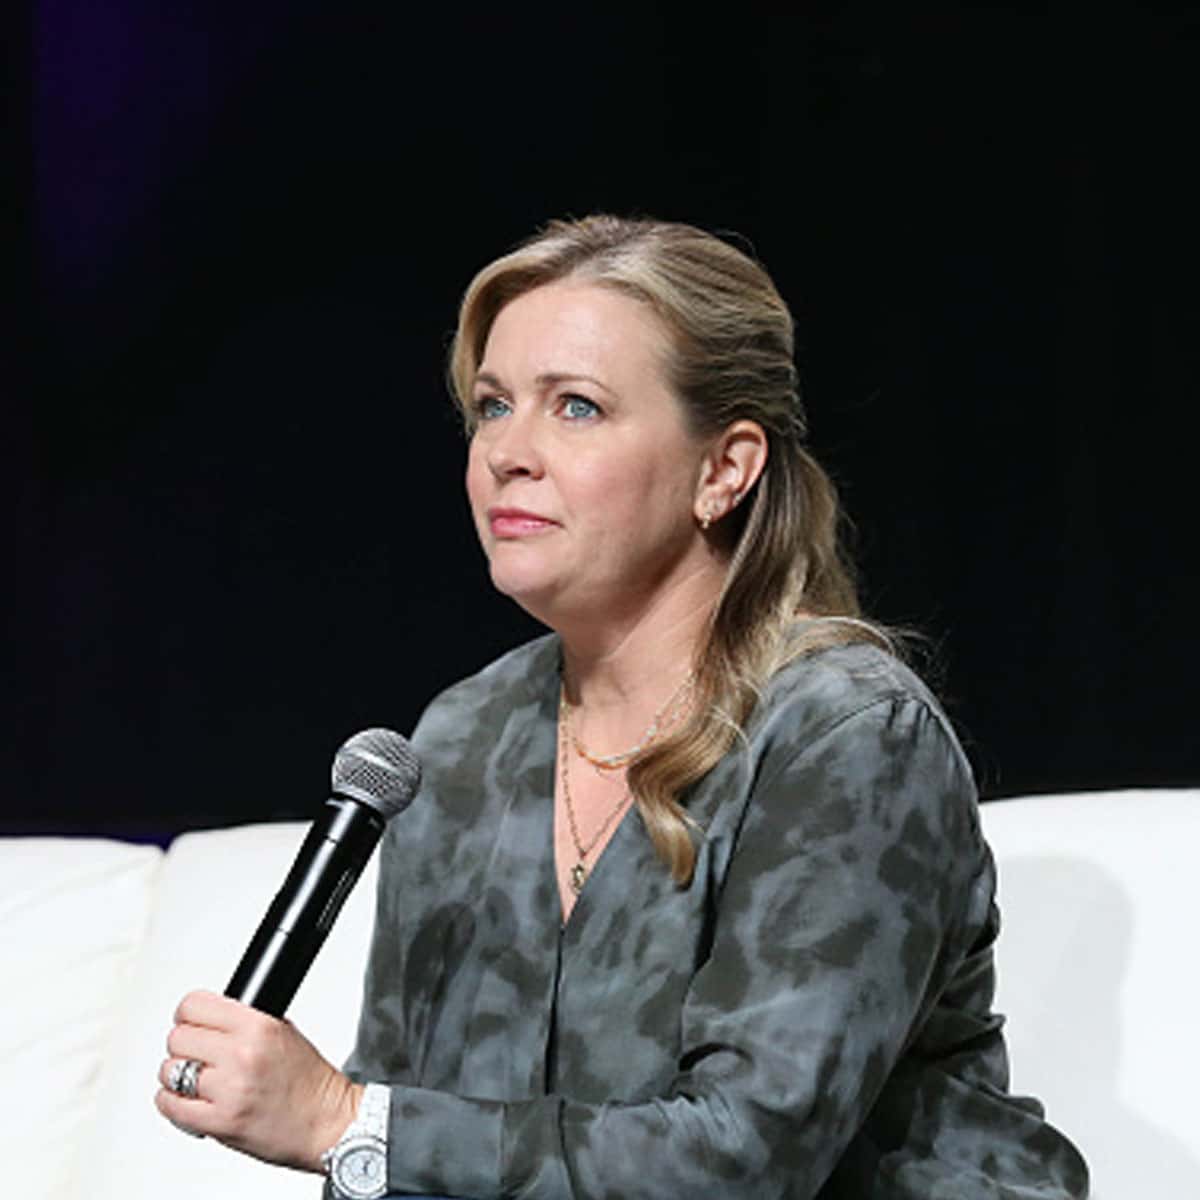 Melissa Joan Hart participates in panel during the 2022 Awesome Con at Walter E. Washington Convention Center